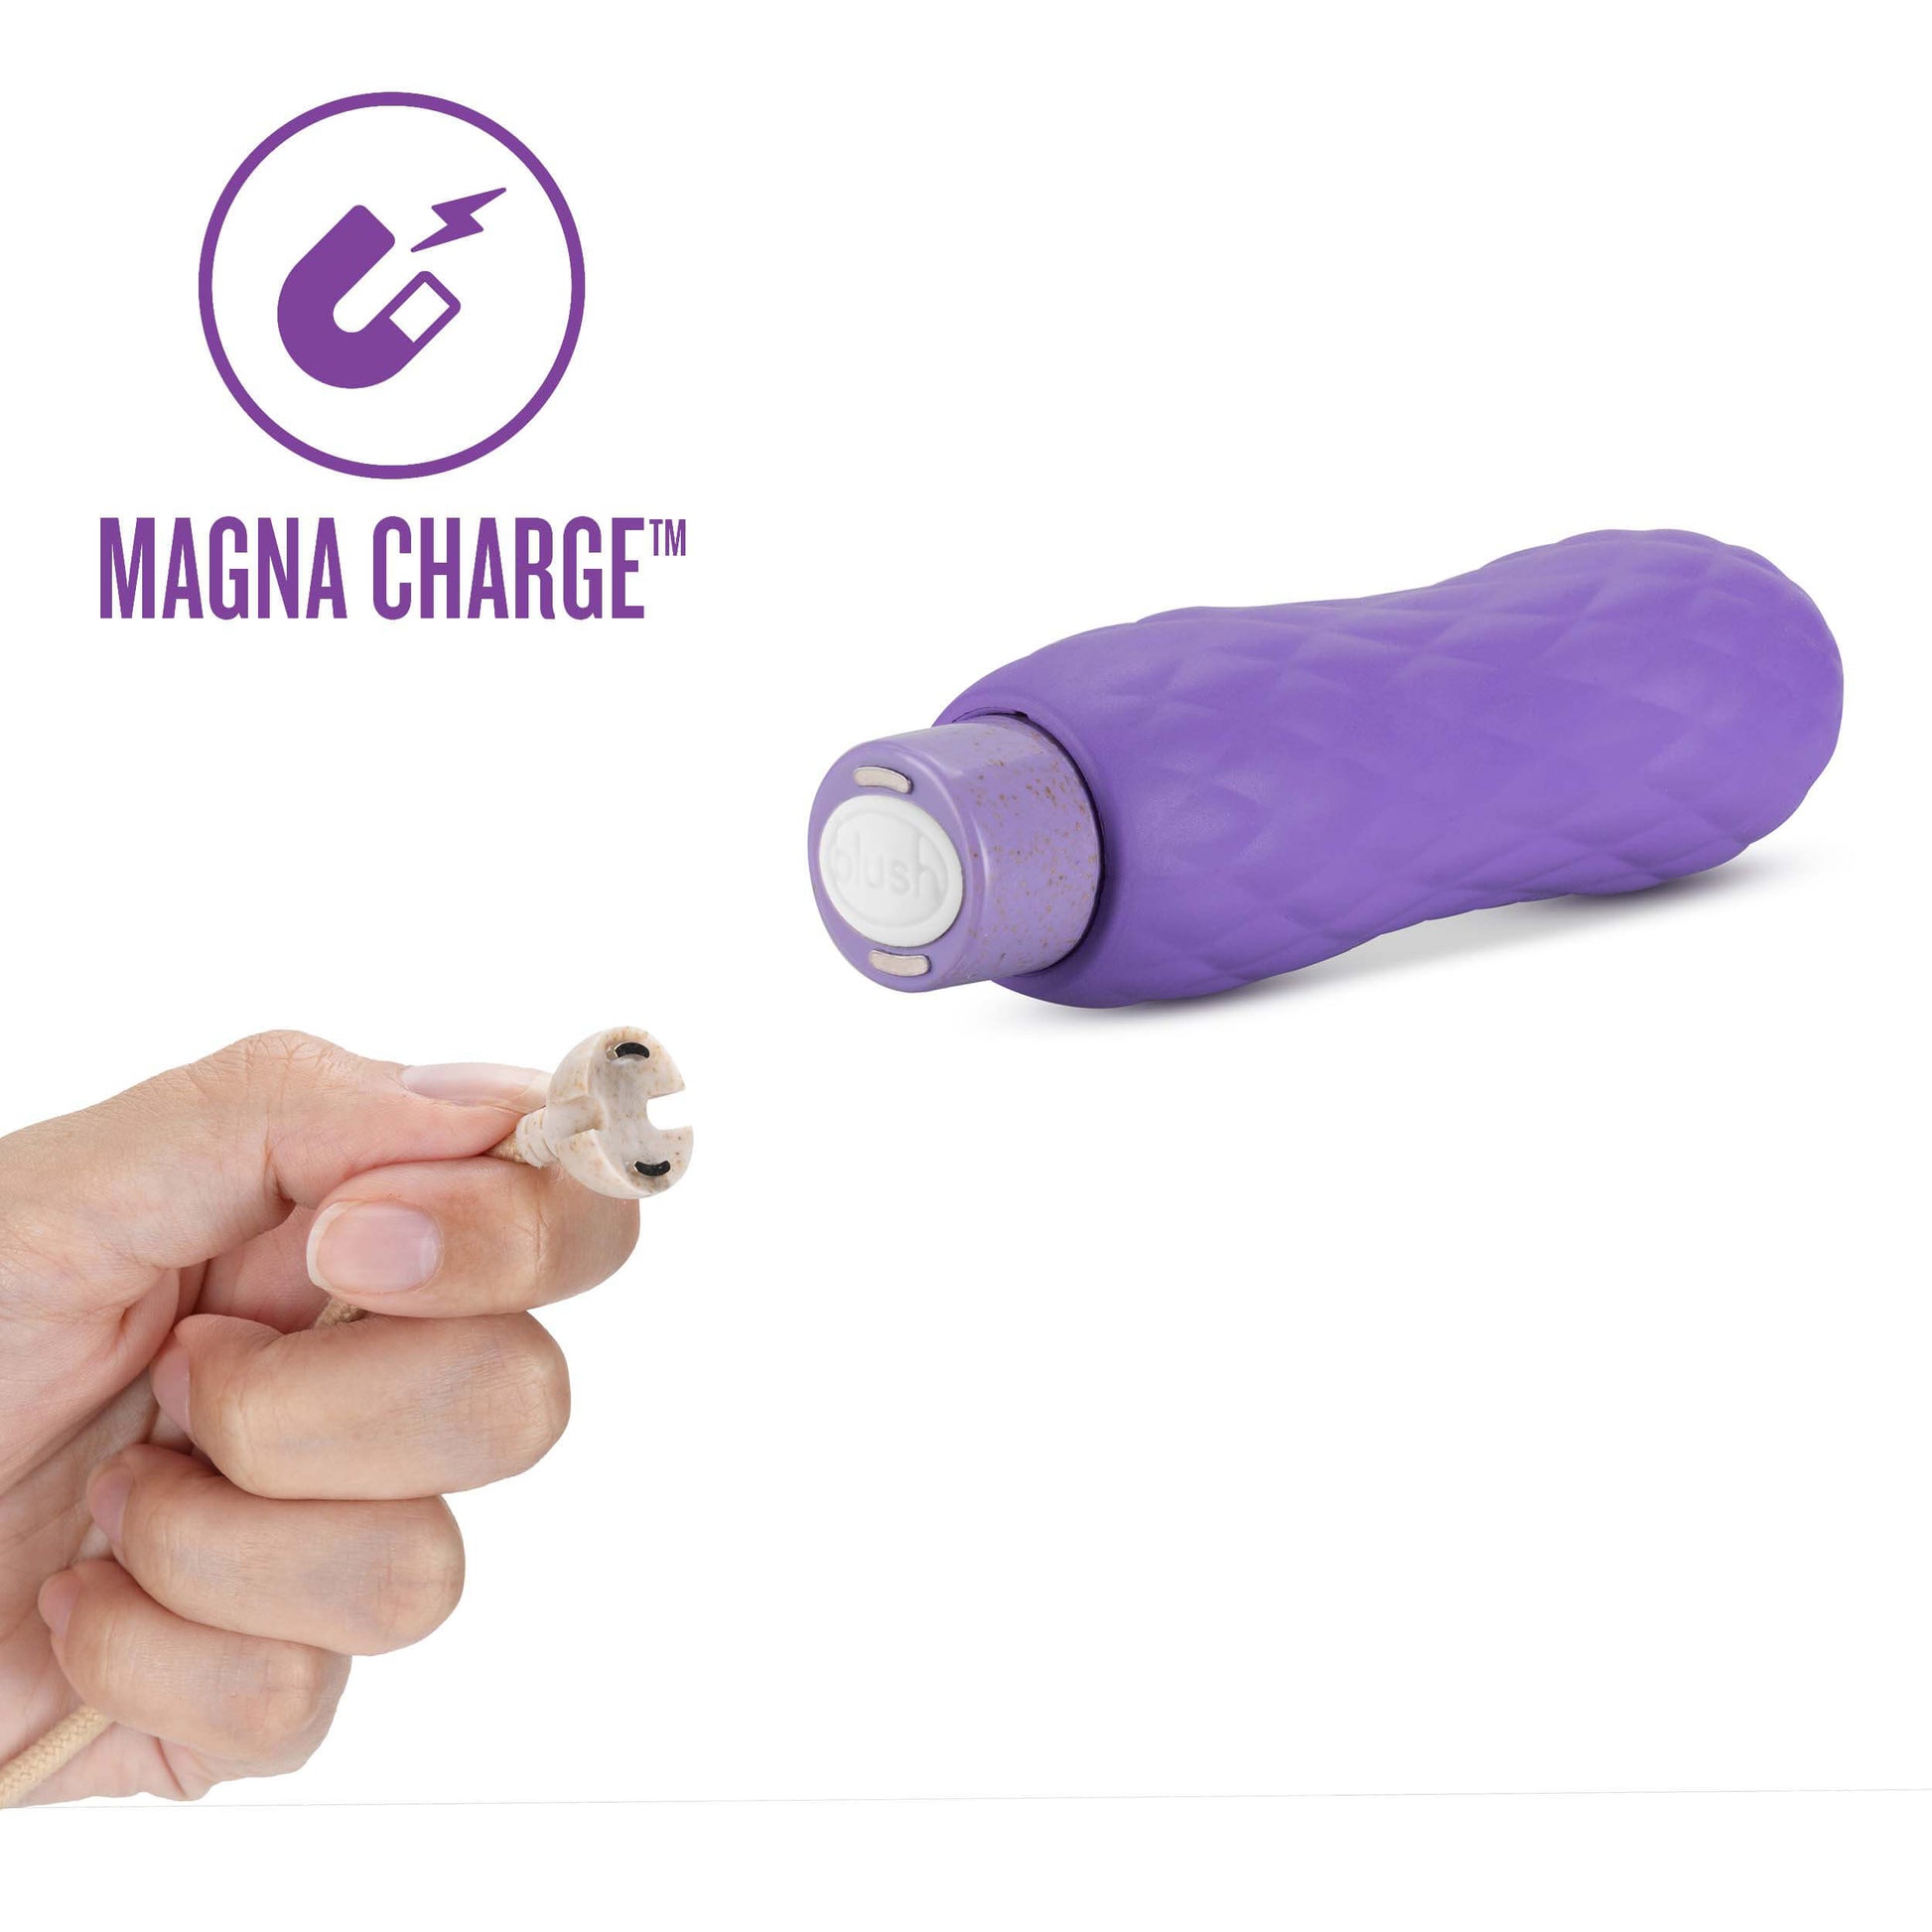 Blush Gaia Eco Bliss Magna Charge - by The Bigger O online sex toy shop. USA, Canada and UK shipping available.